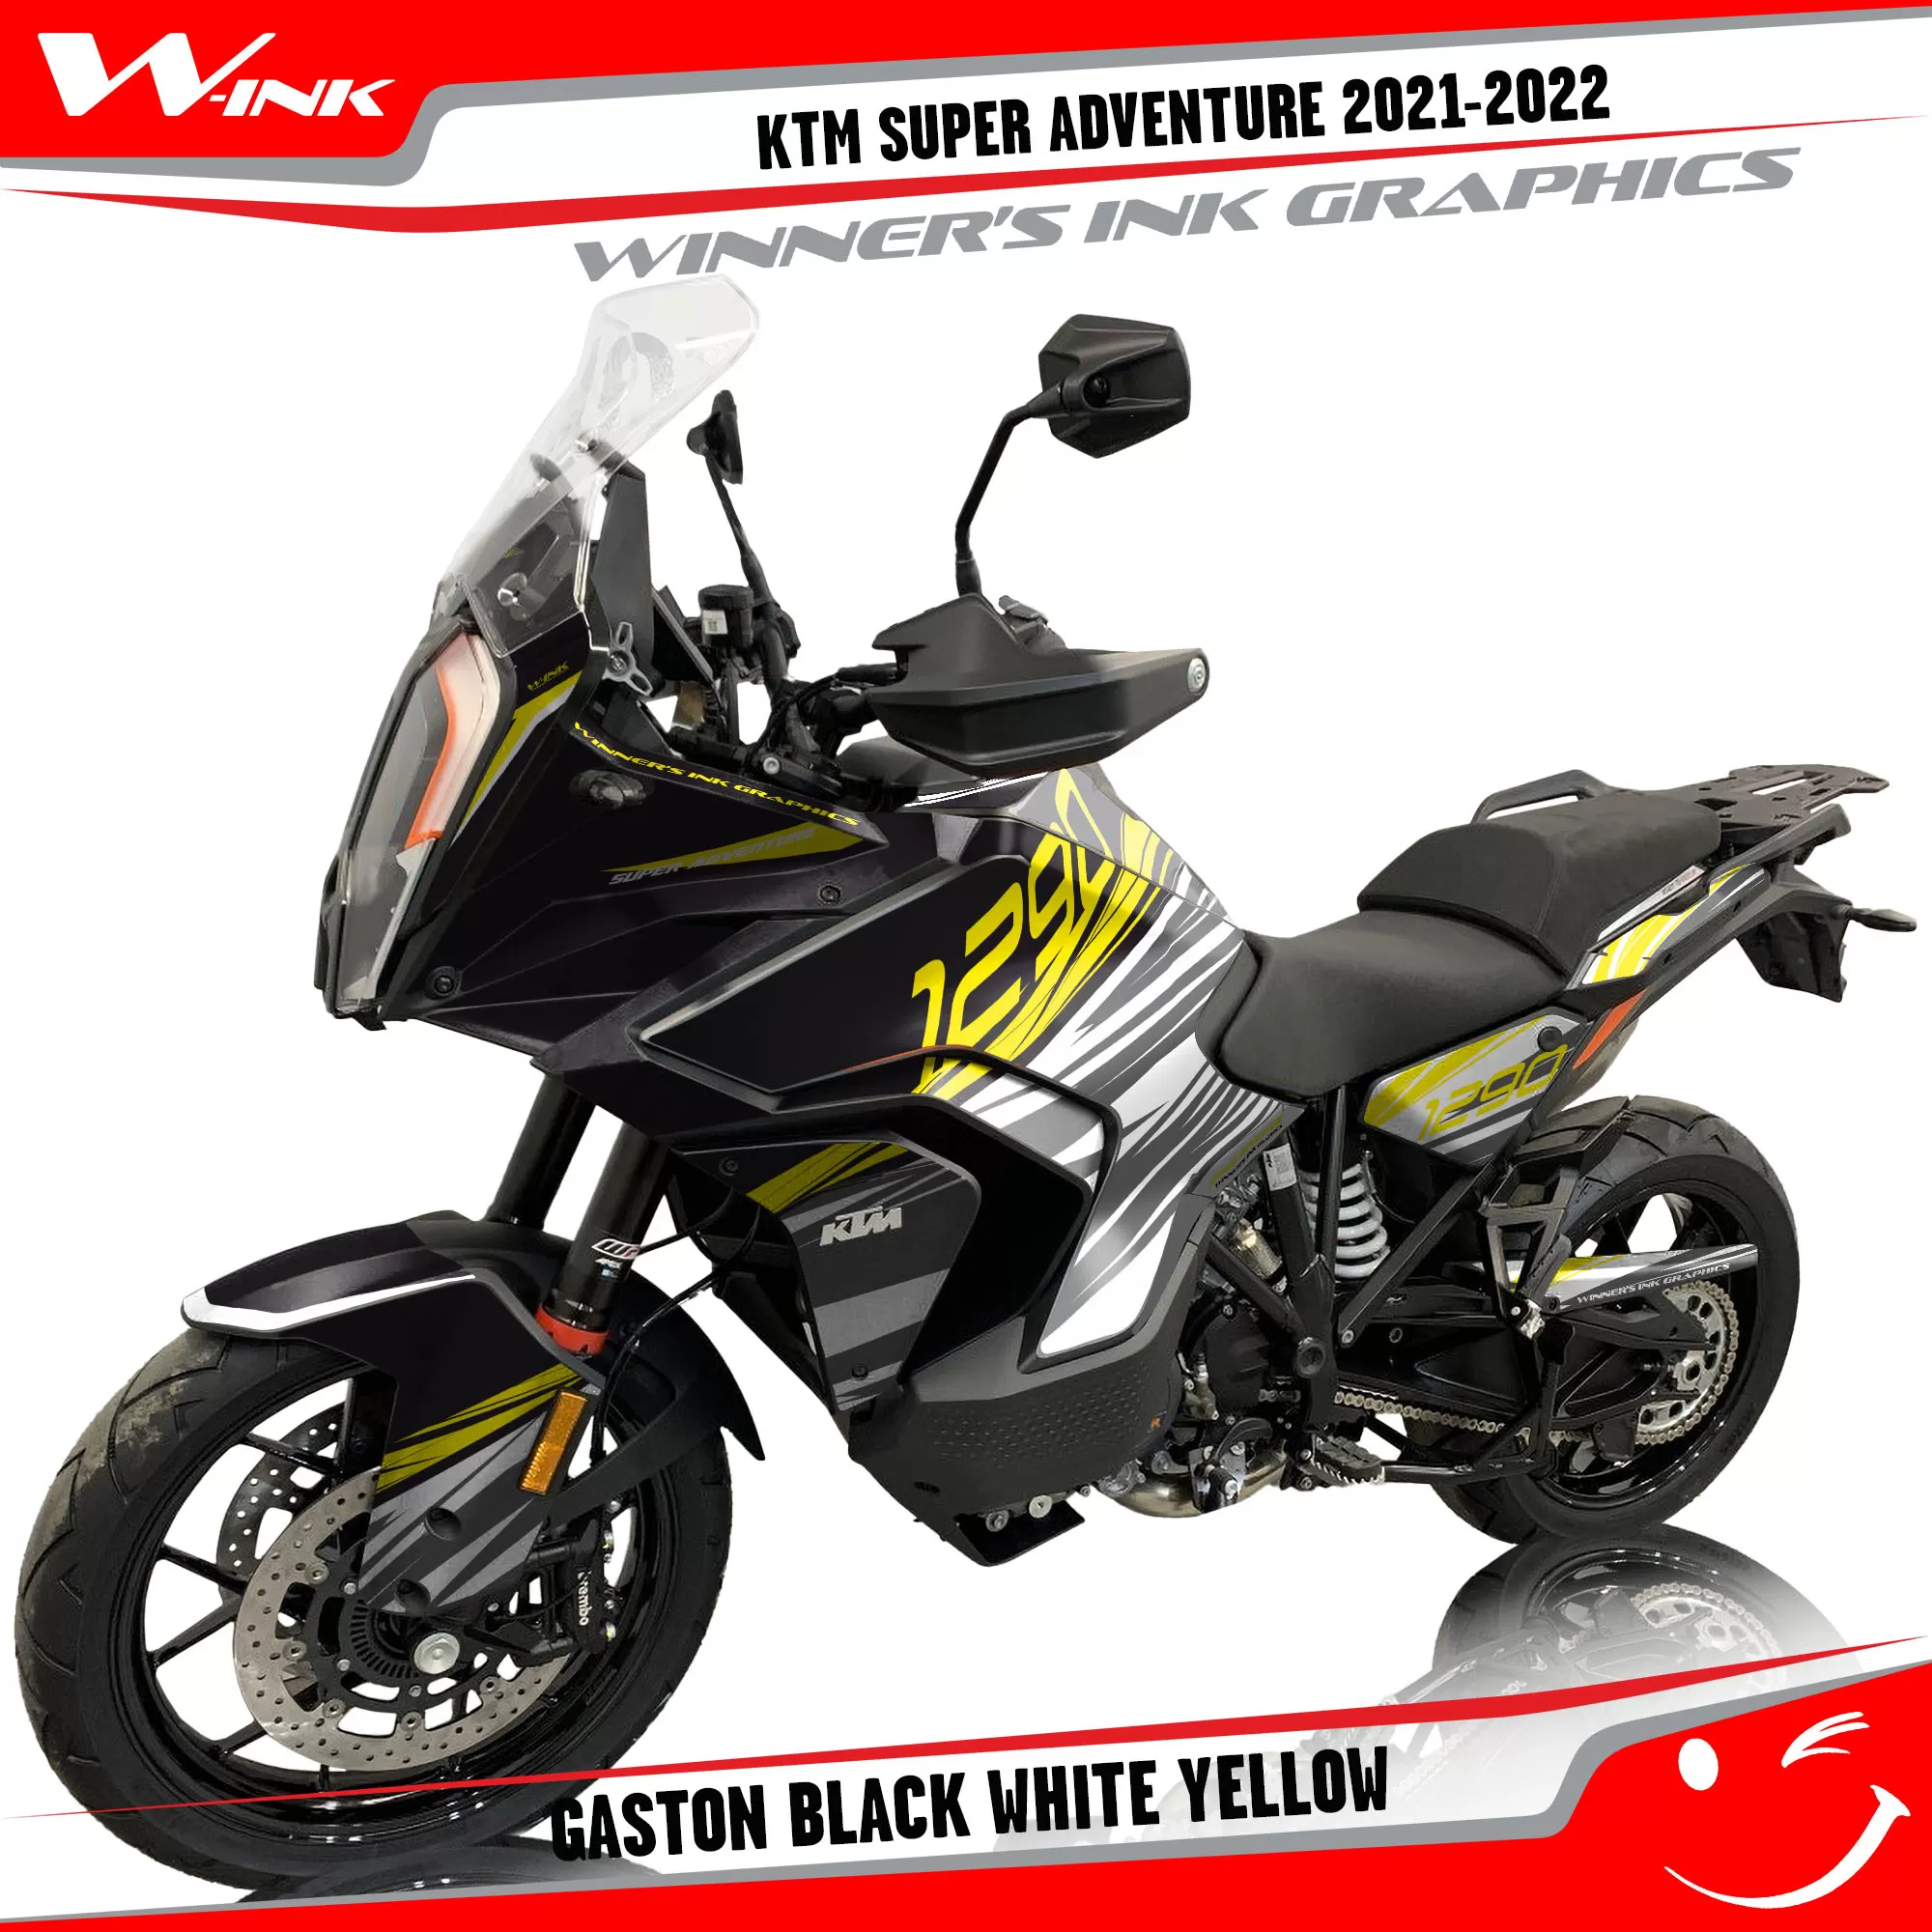 KTM-Super-Adventure-S-2021-2022-graphics-kit-and-decals-with-designs-Gaston-Black-White-Yellow